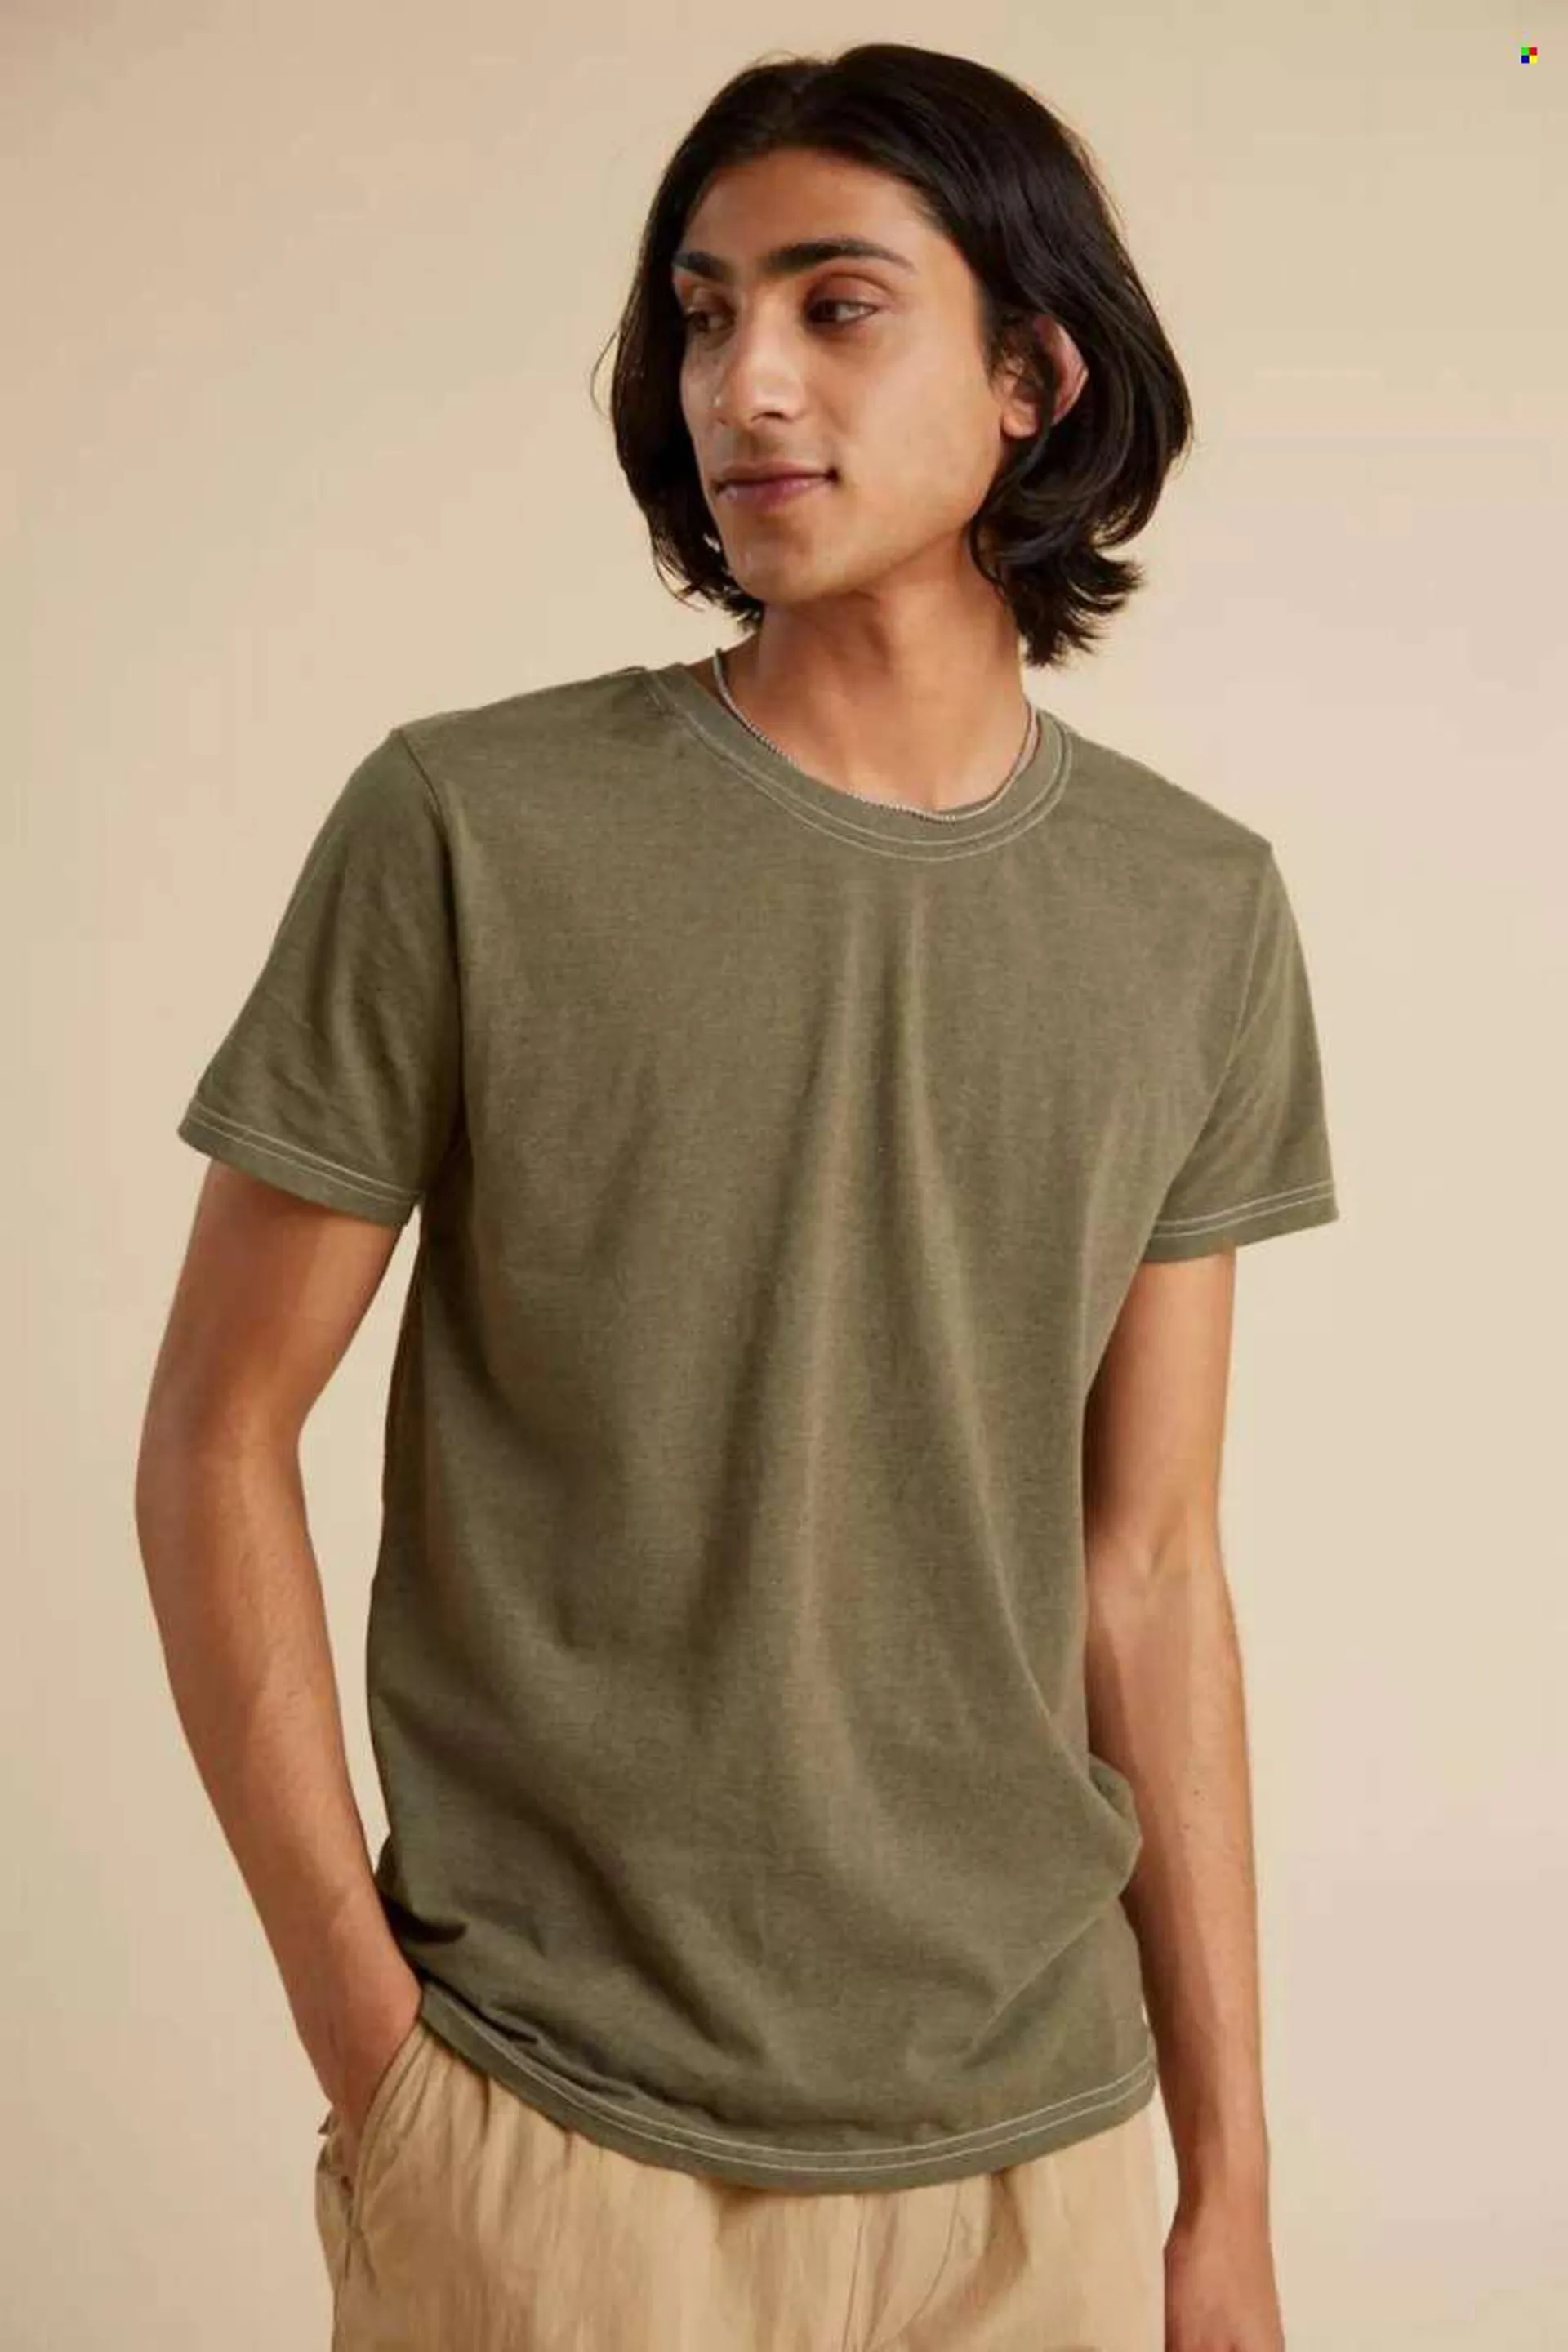 Urban Outfitters tilbud . Side 29.